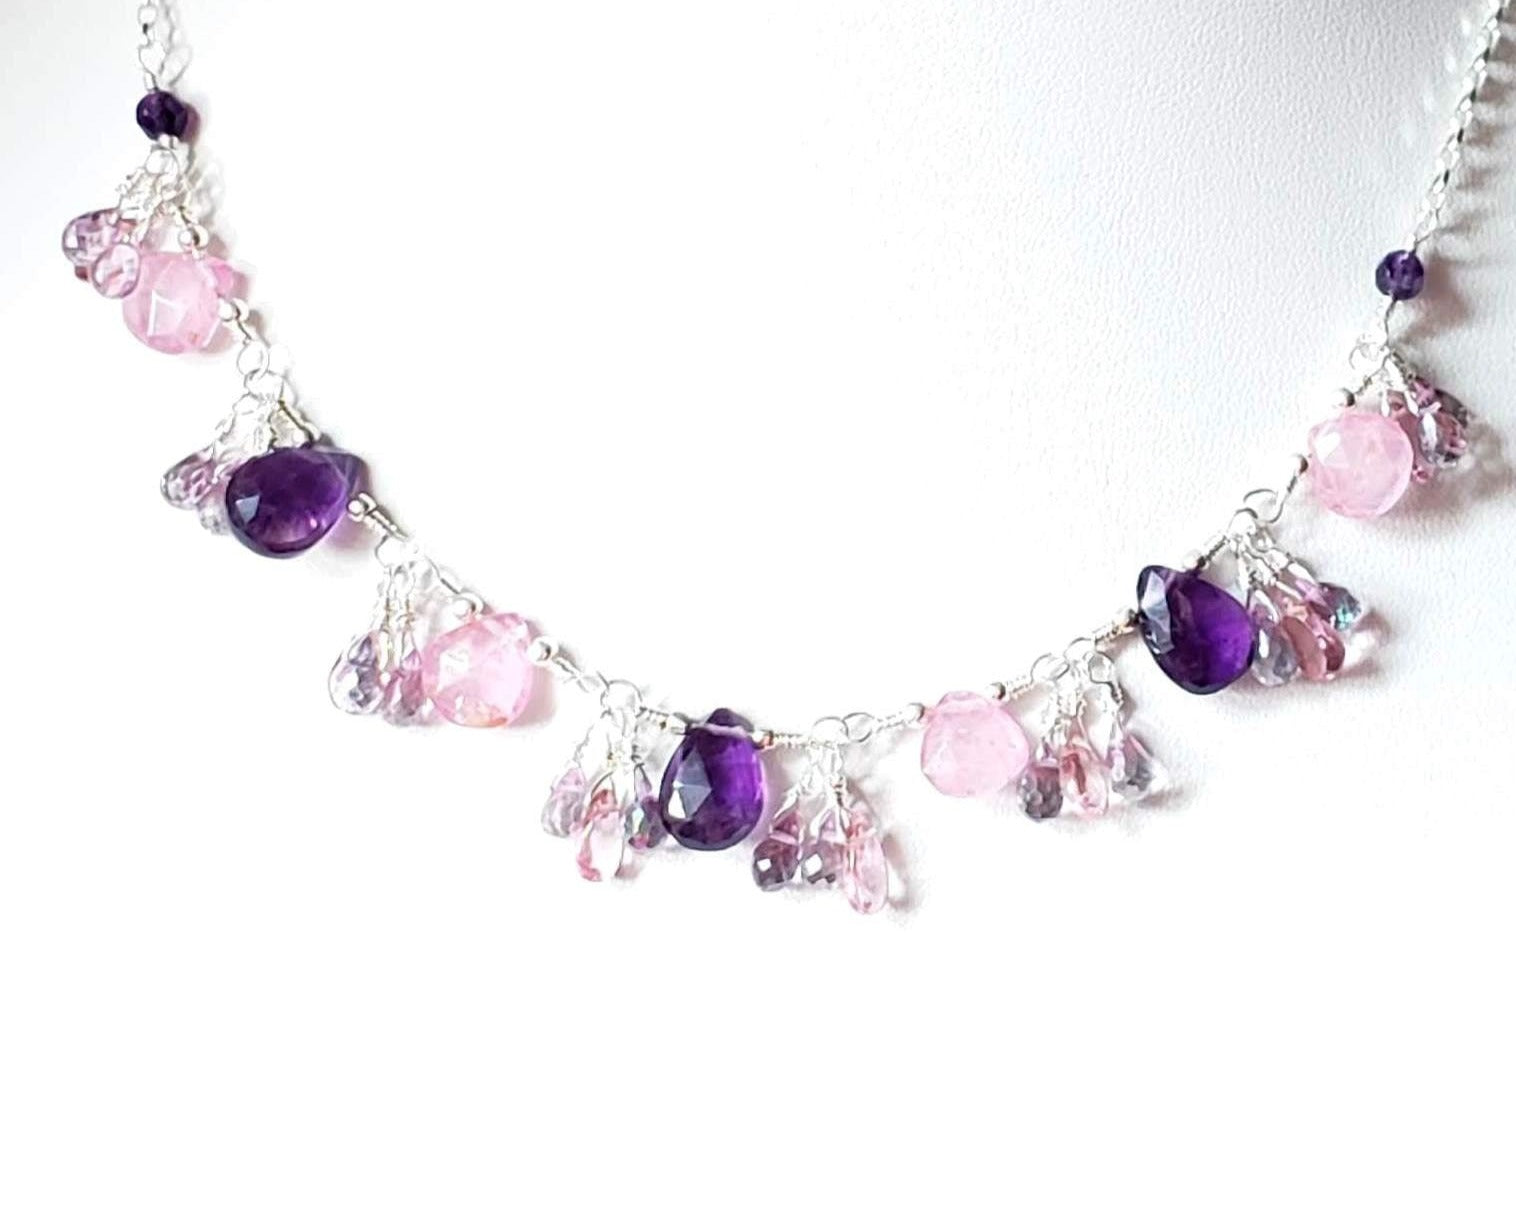 Summer Garden Petunia Gem Necklace-Handcrafted, One of a Kind, Sterling Silver Necklace made with Amethyst, Strawberry Quartz, Pink Topaz, Mystic Topaz